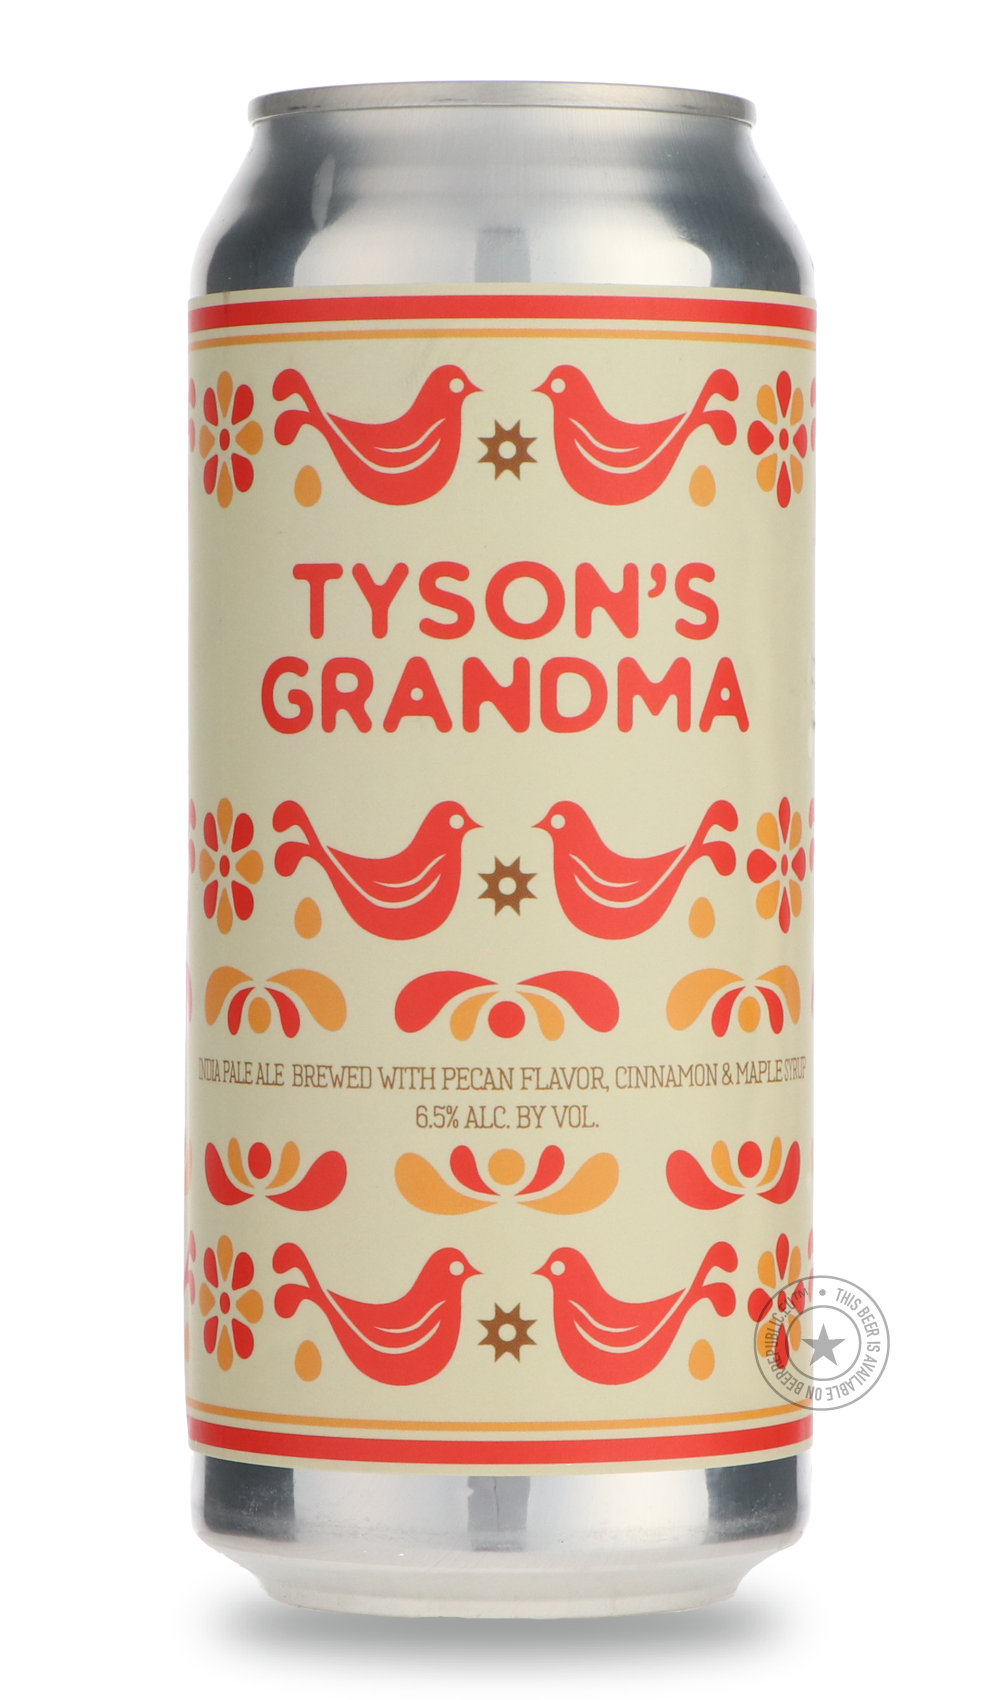 -Aslin- Tyson’s Grandma-IPA- Only @ Beer Republic - The best online beer store for American & Canadian craft beer - Buy beer online from the USA and Canada - Bier online kopen - Amerikaans bier kopen - Craft beer store - Craft beer kopen - Amerikanisch bier kaufen - Bier online kaufen - Acheter biere online - IPA - Stout - Porter - New England IPA - Hazy IPA - Imperial Stout - Barrel Aged - Barrel Aged Imperial Stout - Brown - Dark beer - Blond - Blonde - Pilsner - Lager - Wheat - Weizen - Amber - Barley Wi